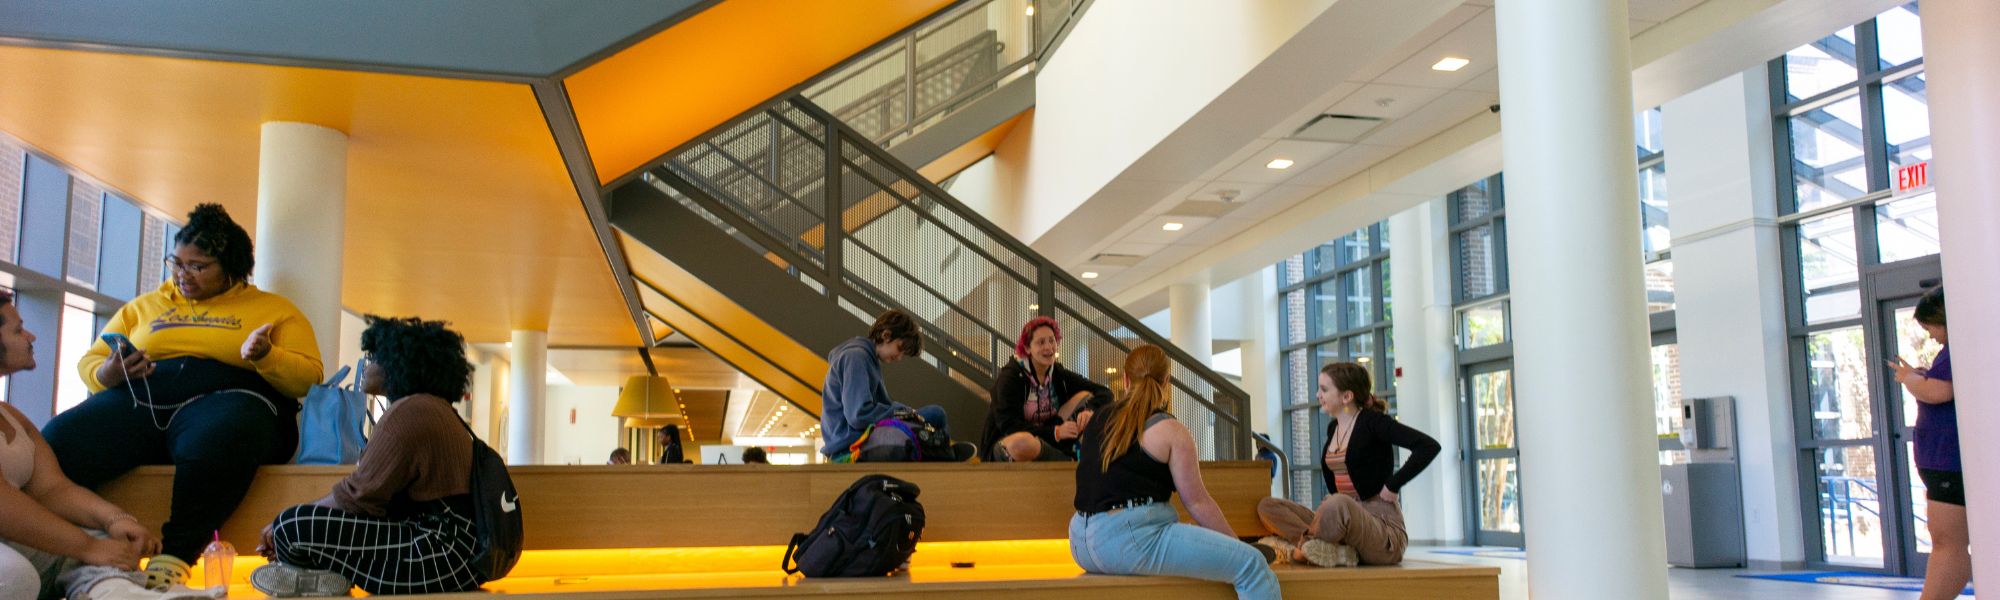 Students sitting around staircase in student union